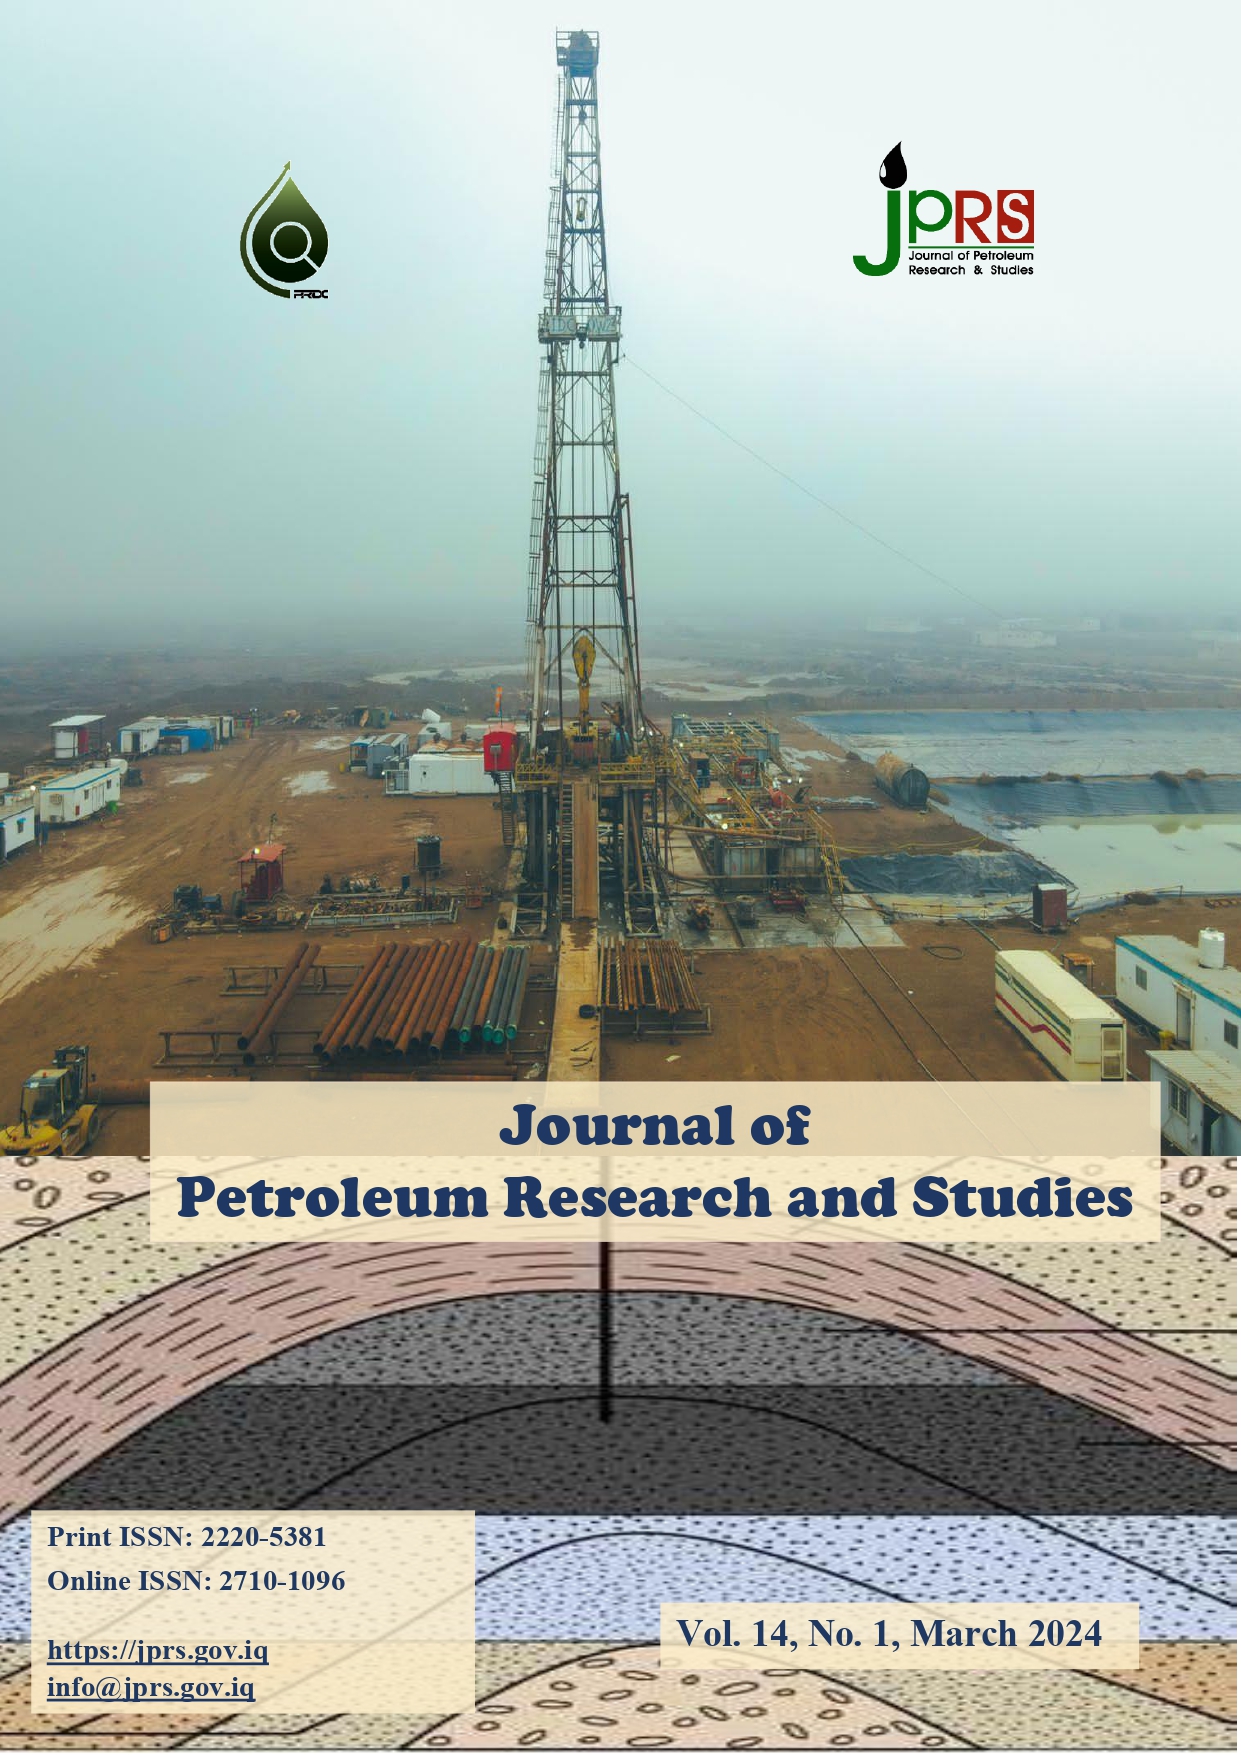 					View Vol. 14 No. 1 (2024): Journal of Petroleum Research and Studies
				